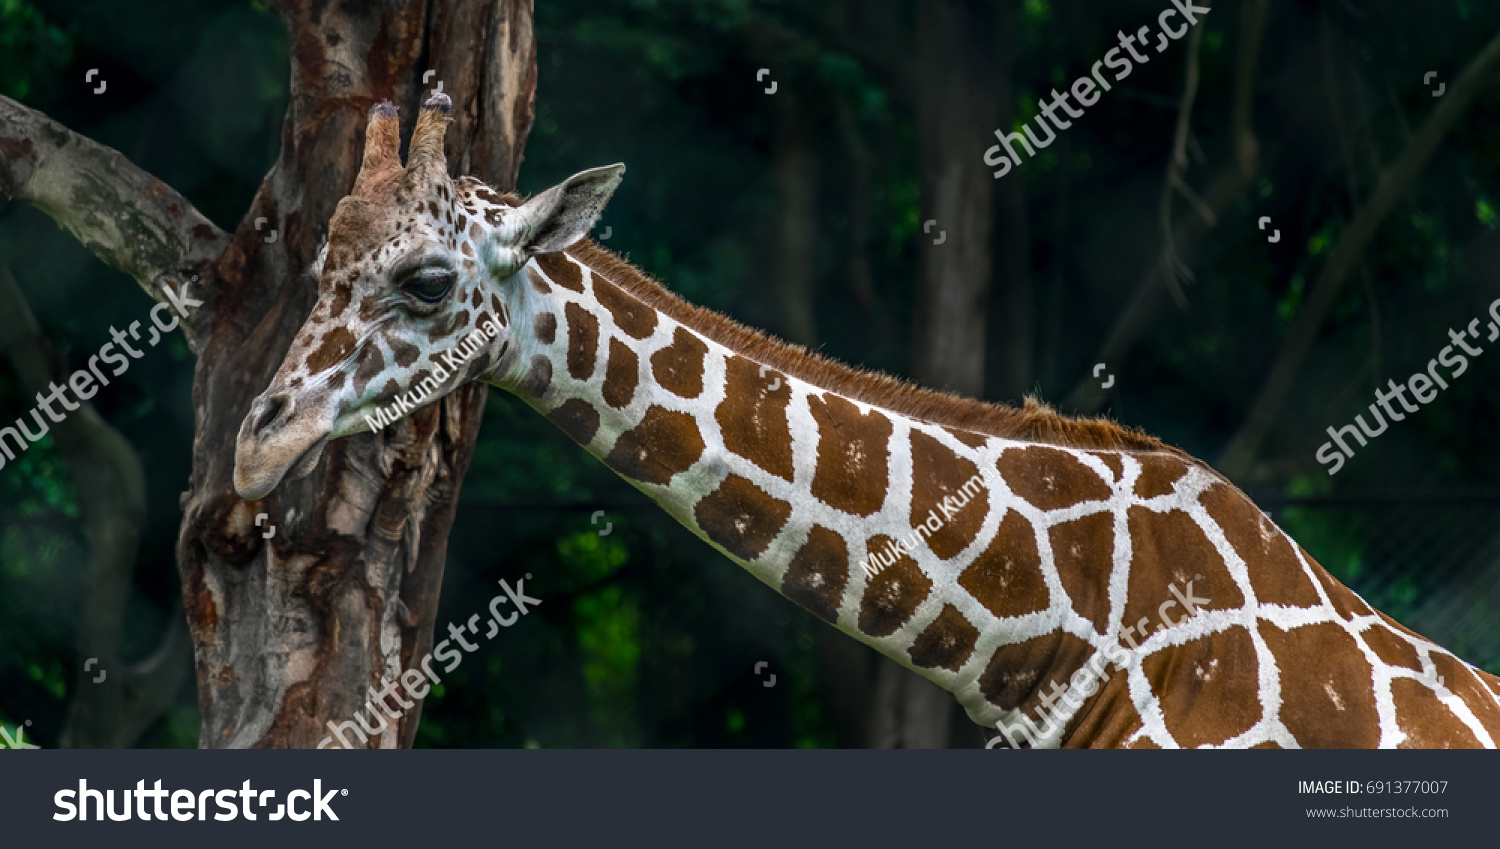 Giraffe, Closeup of Giraffe.
The giraffe is a genus of African even-toed ungulate mammals, the tallest living terrestrial animals and the largest ruminants.  #691377007